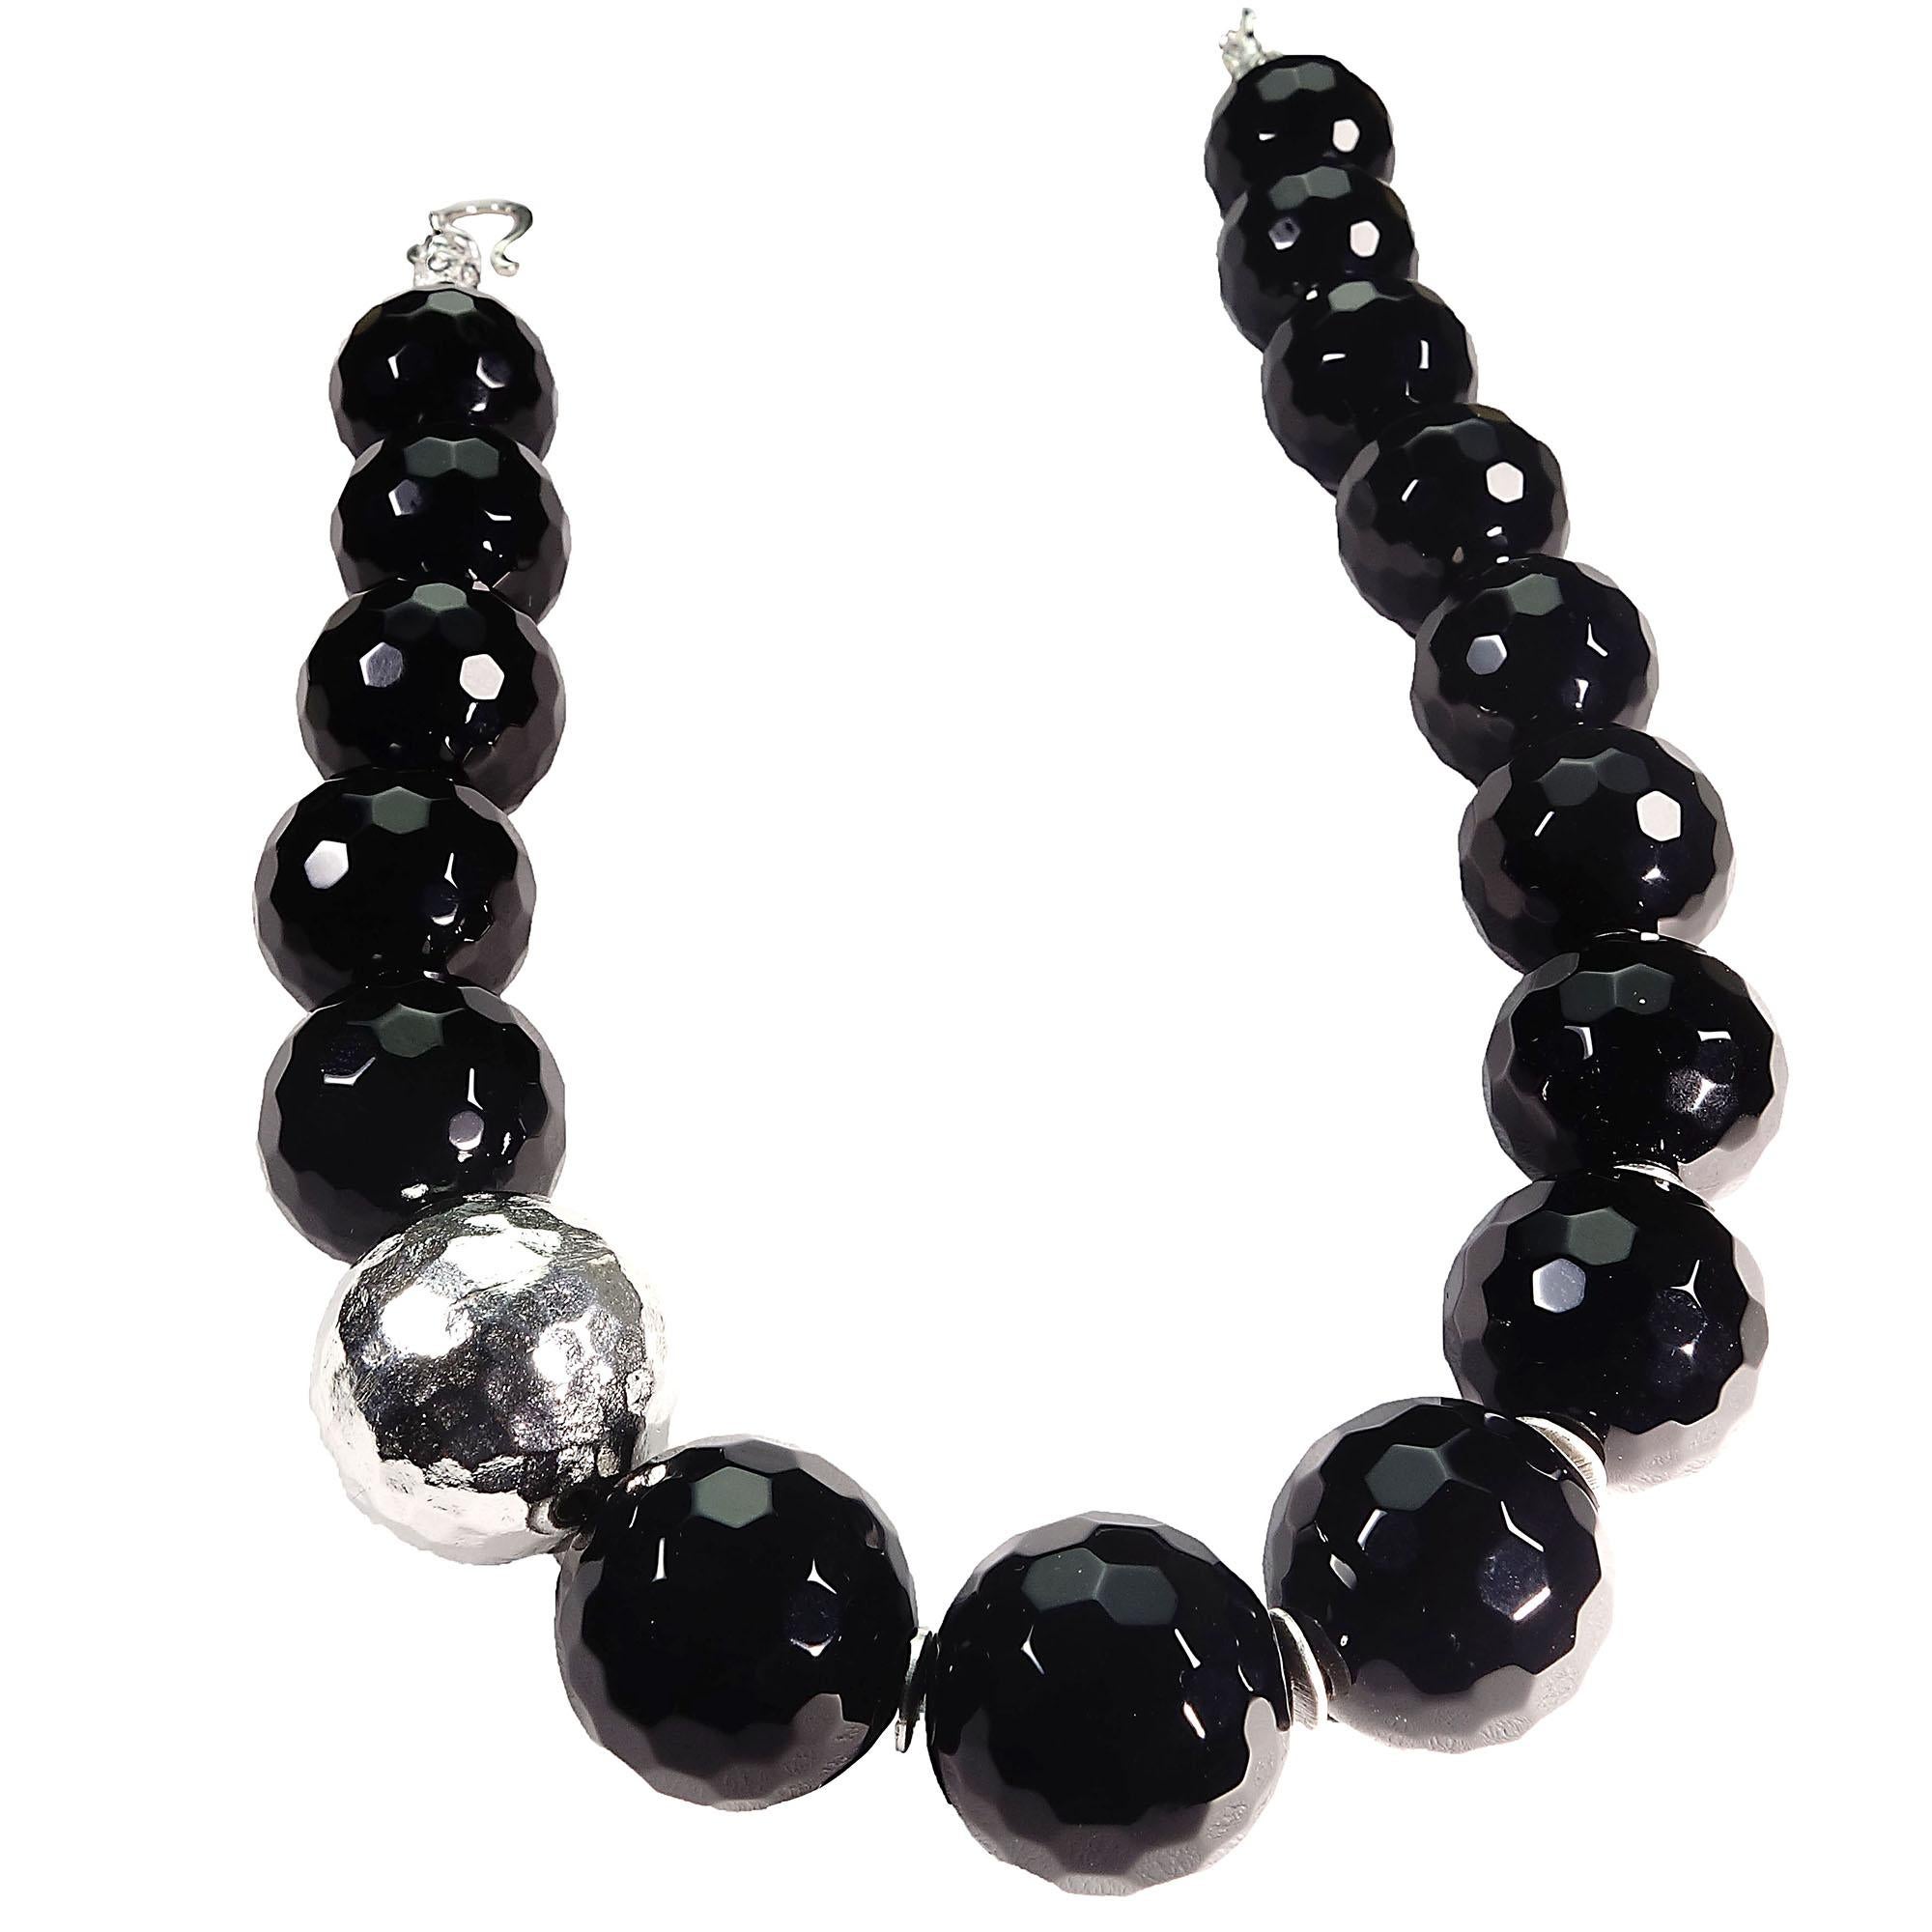 Bead AJD Elegant Necklace of Black Onyx with Pure Silver Focal